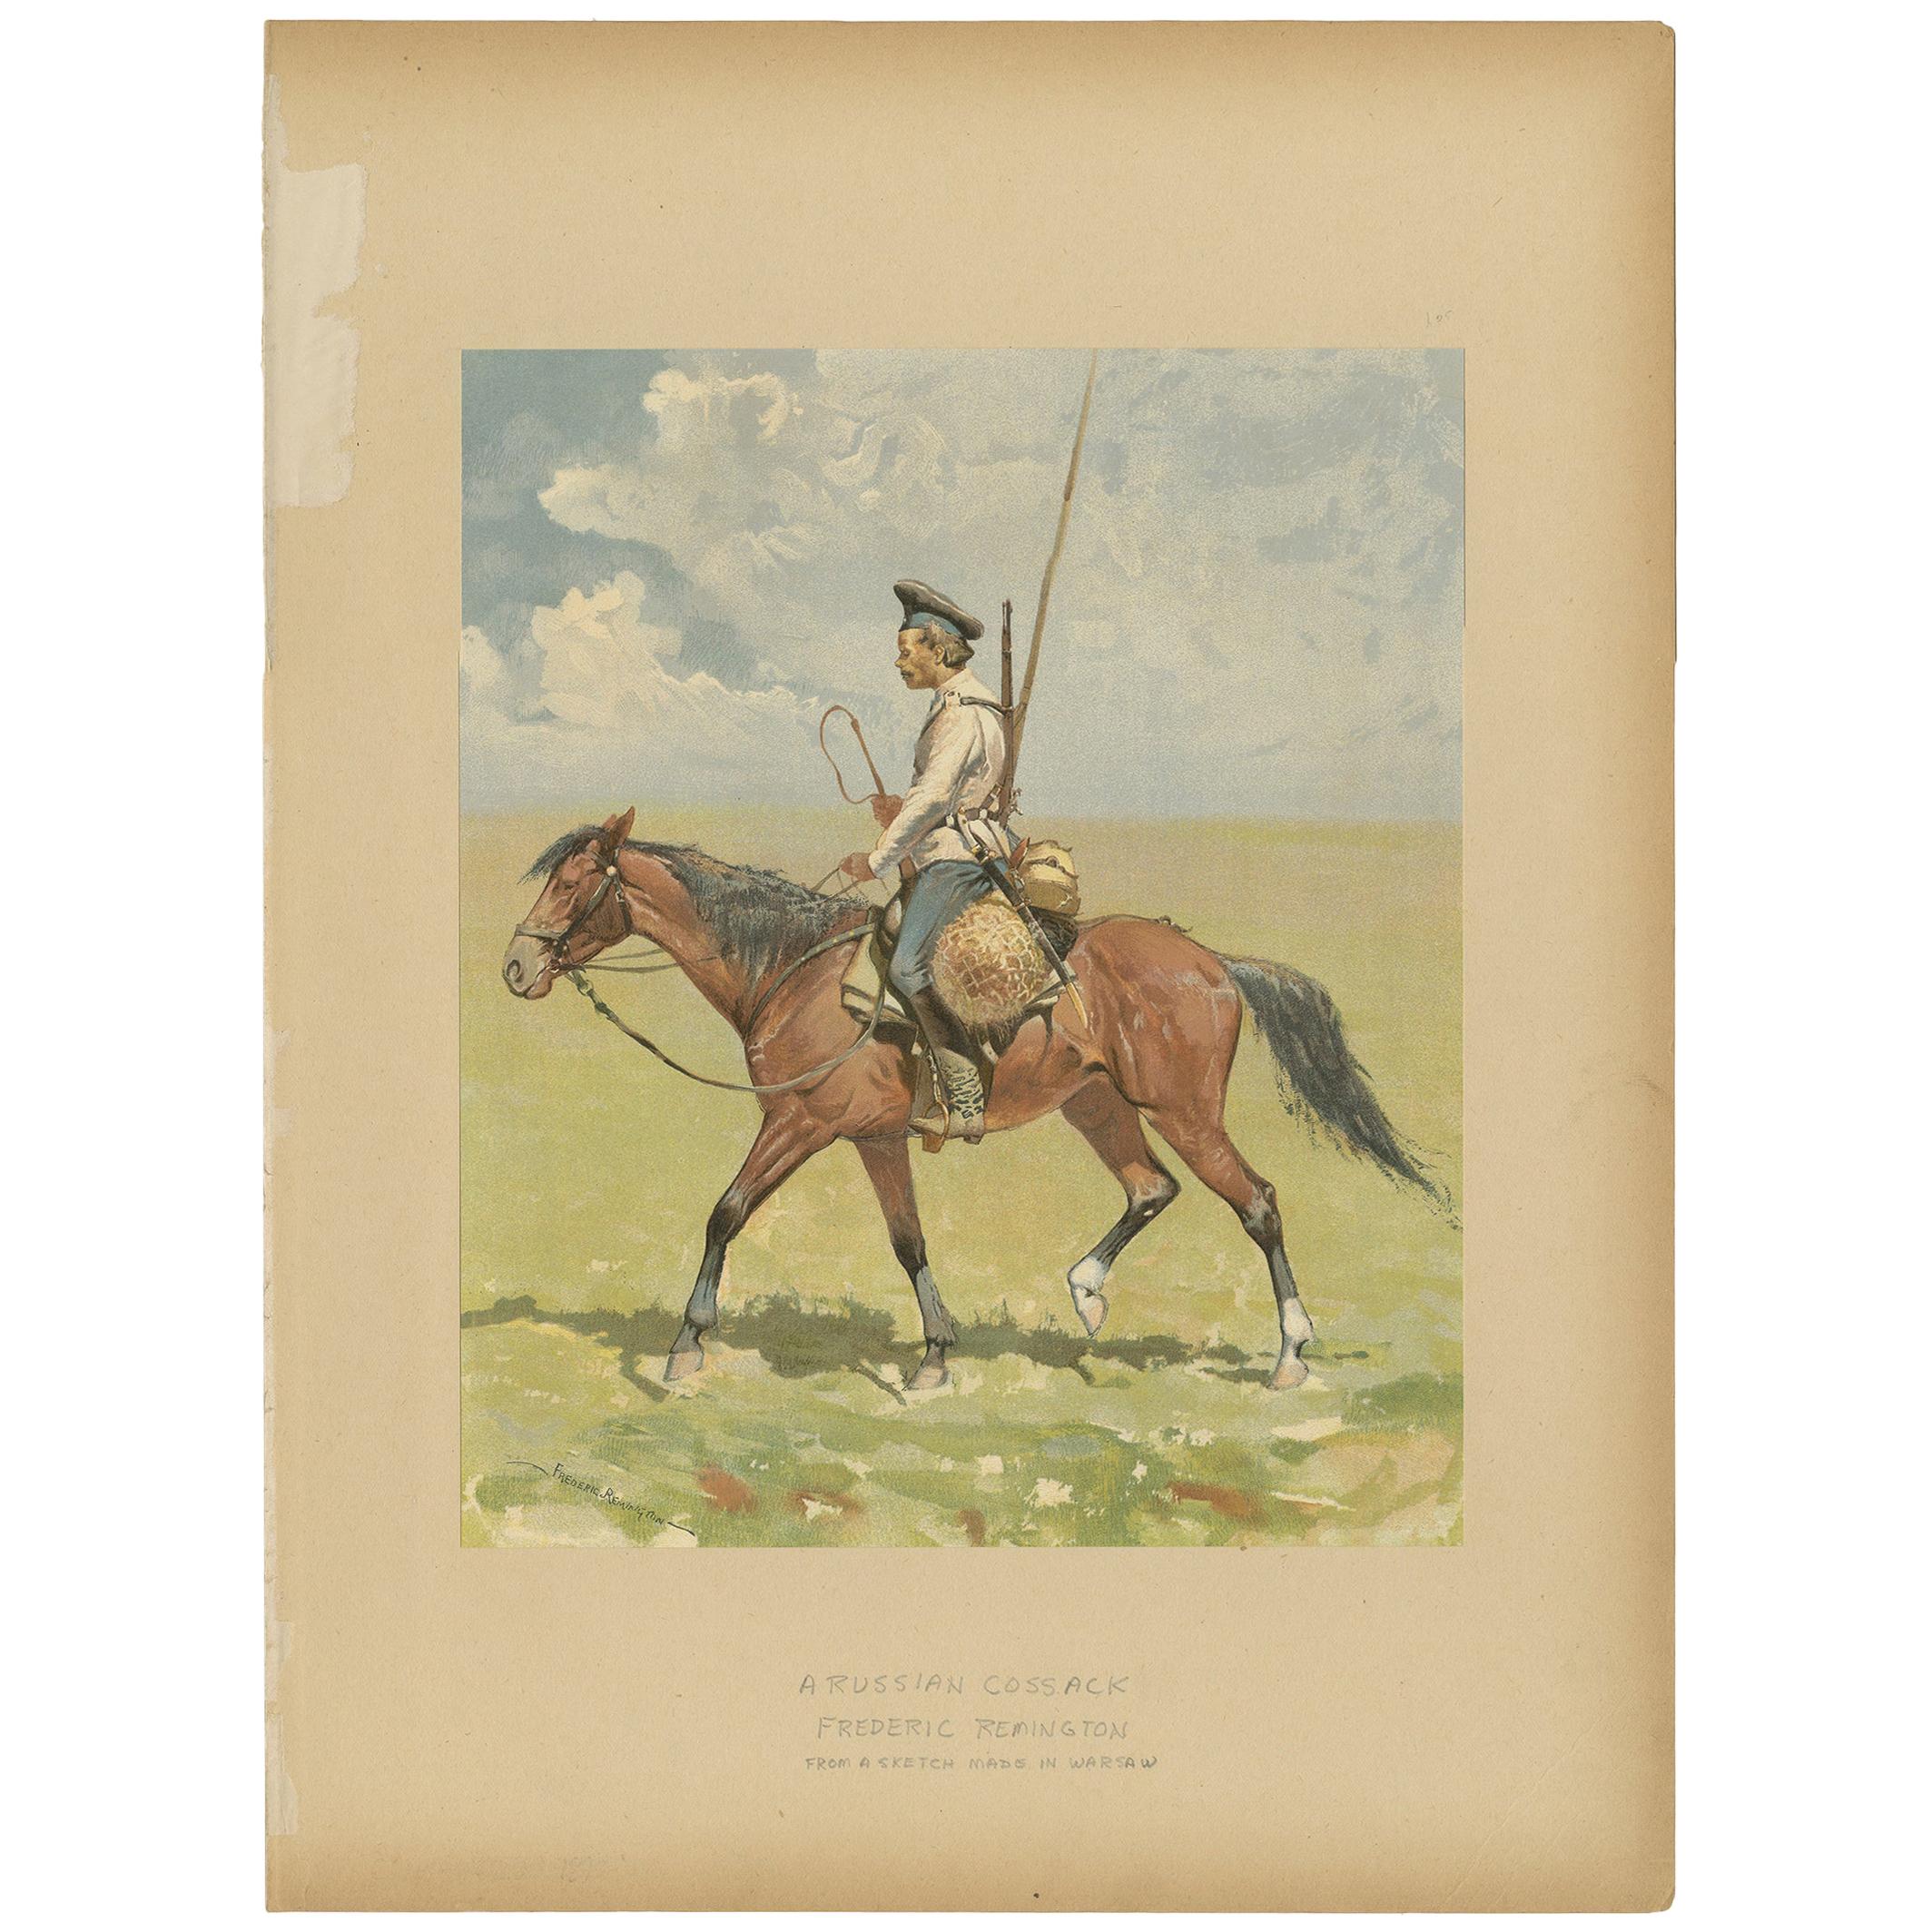 Antique Print of a Russian Cossack Made after F. Remington, circa 1893